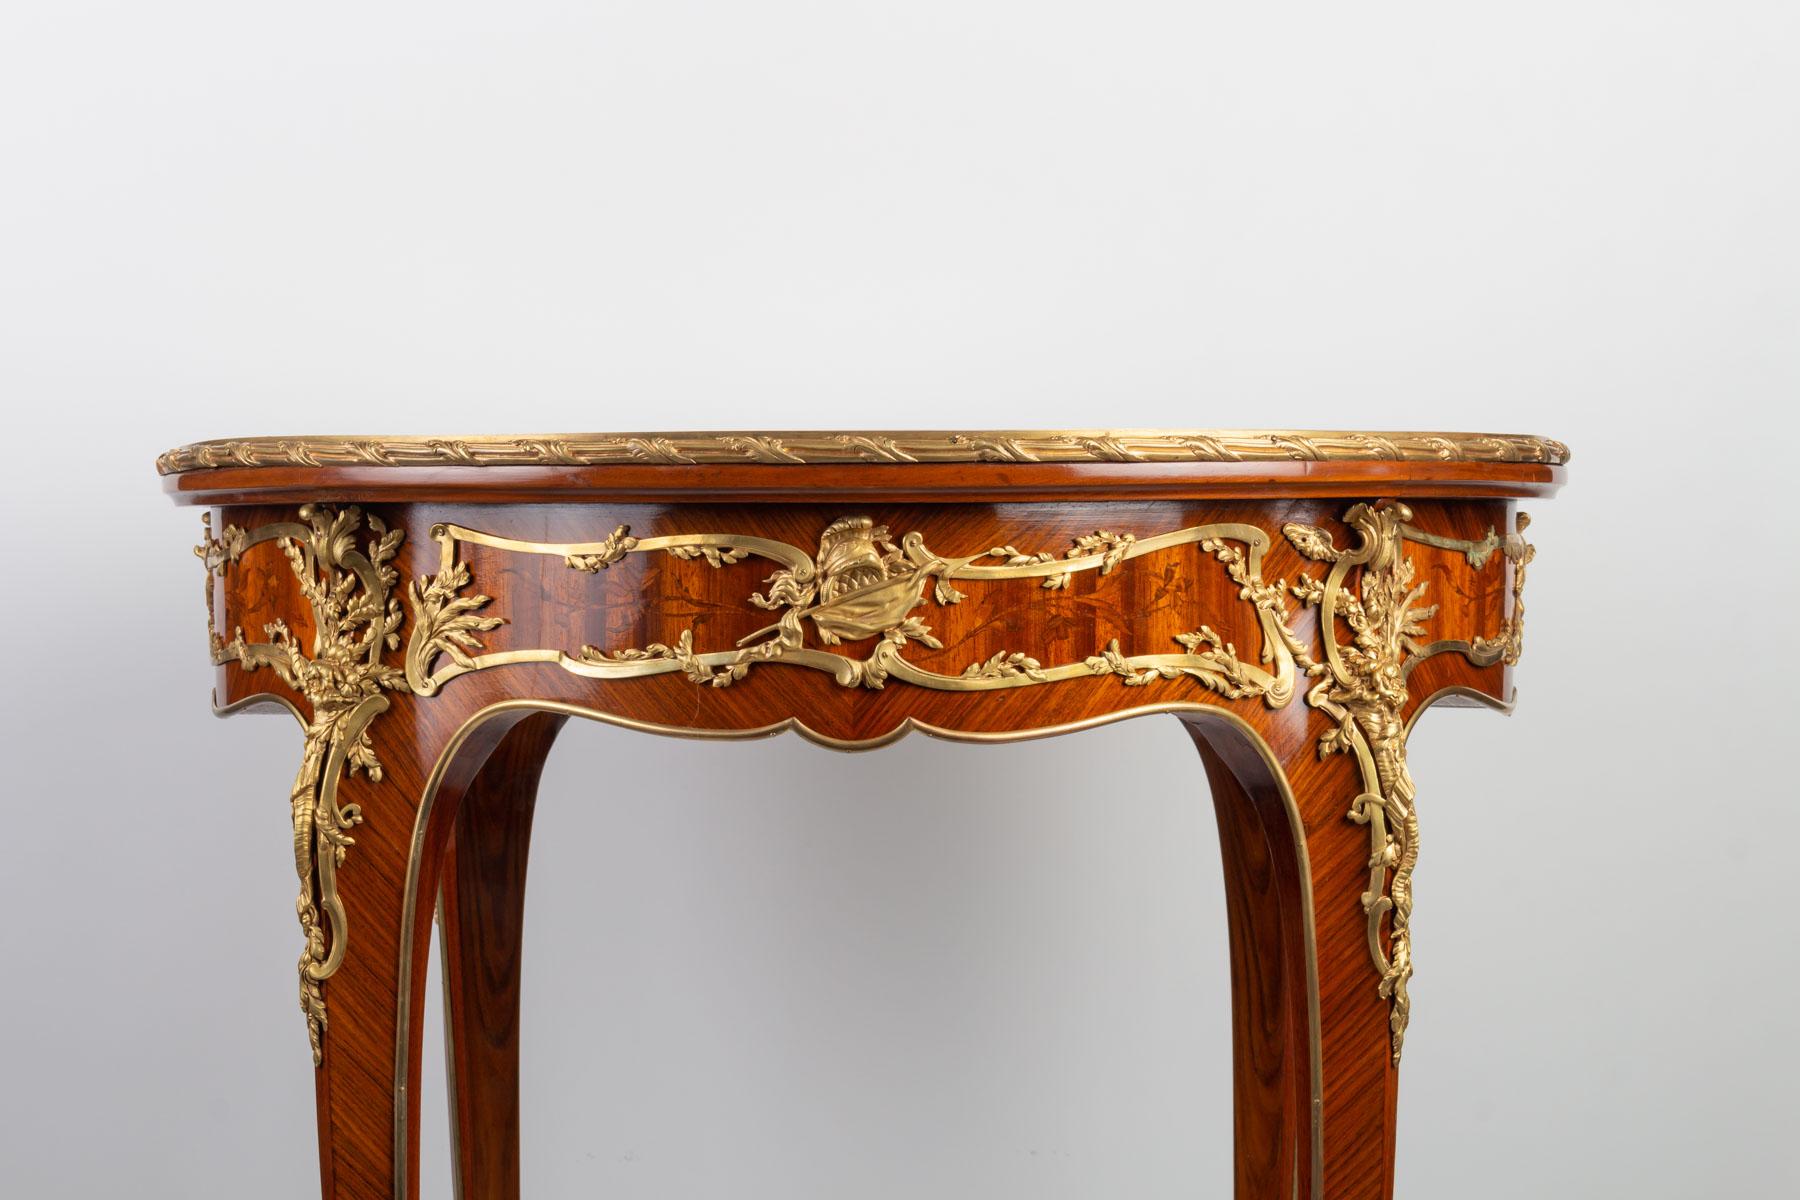 Pedestal table in marquetry and gilt bronze, 19th century, Napoleon III period.
Measures: H 77 cm, D 67 cm.